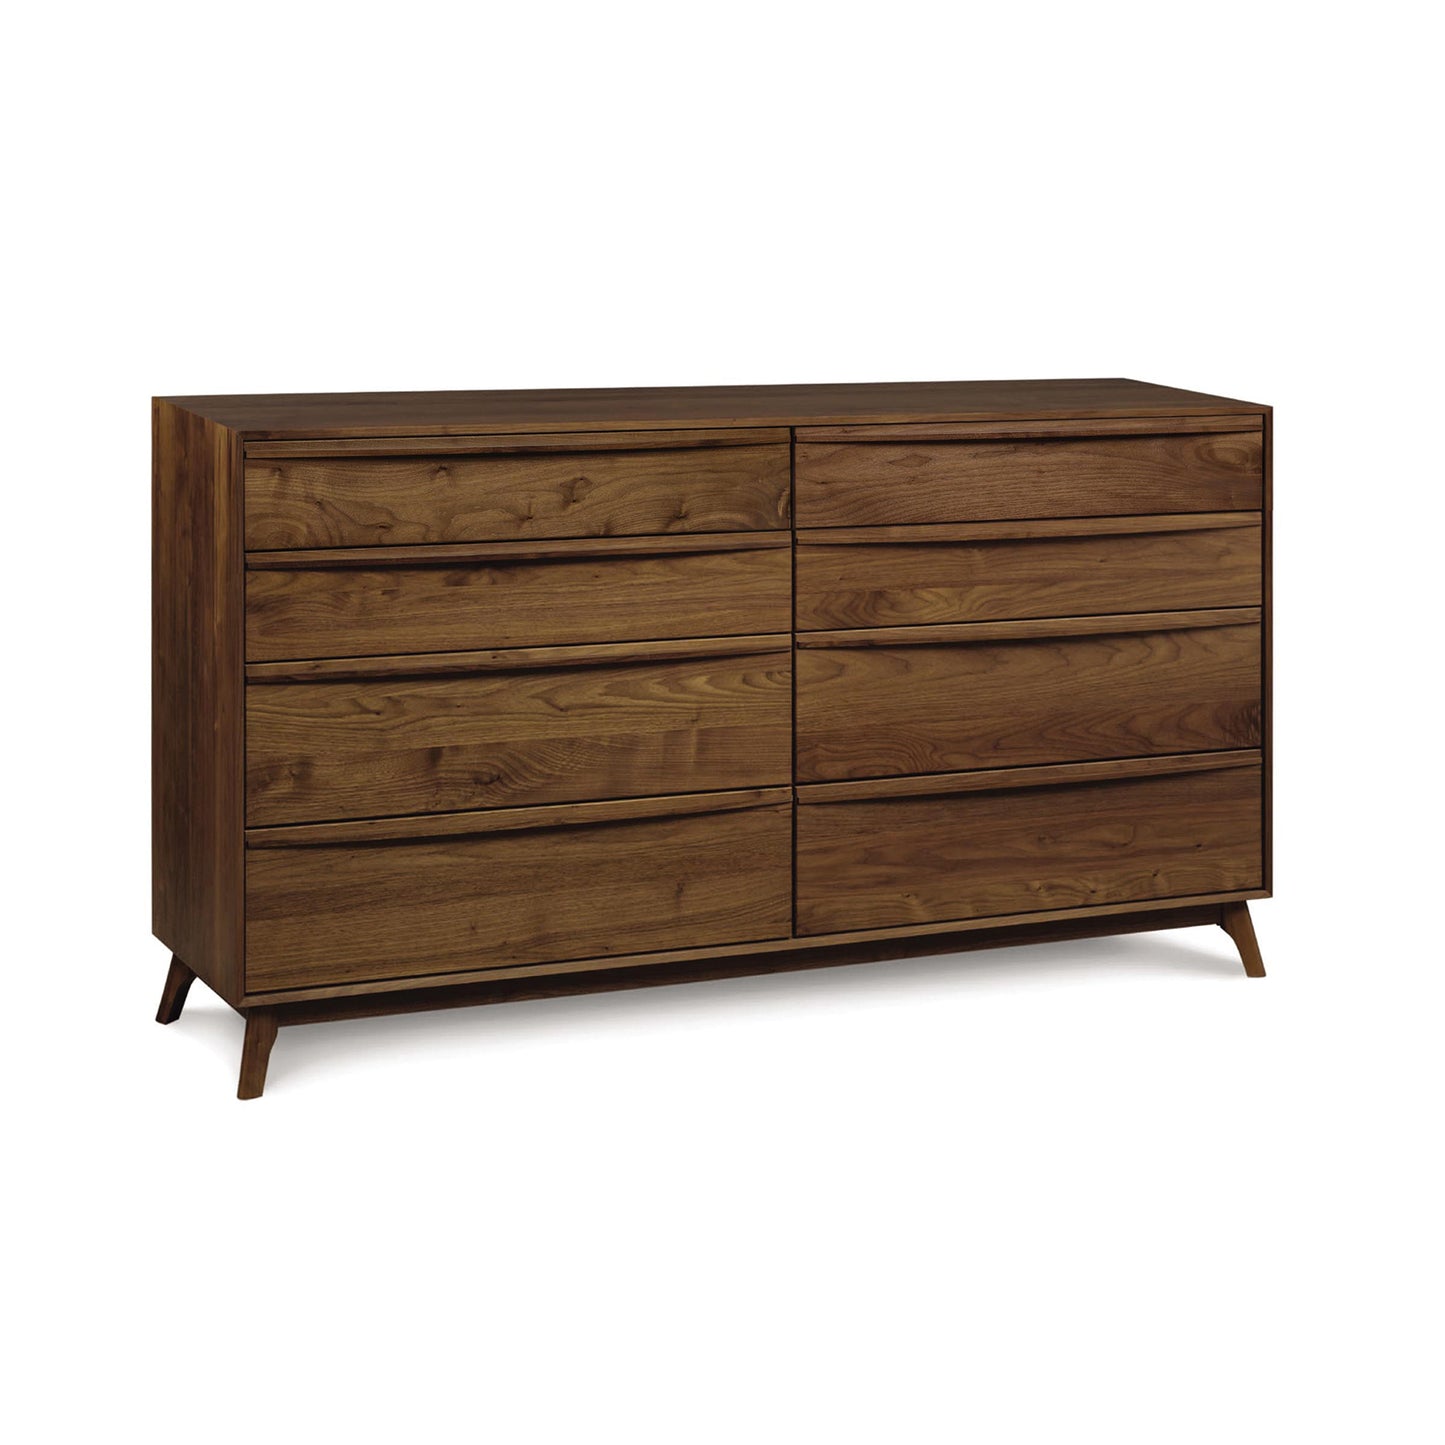 A mid-century modern Catalina 8-Drawer Dresser by Copeland Furniture, perfect for the bedroom.